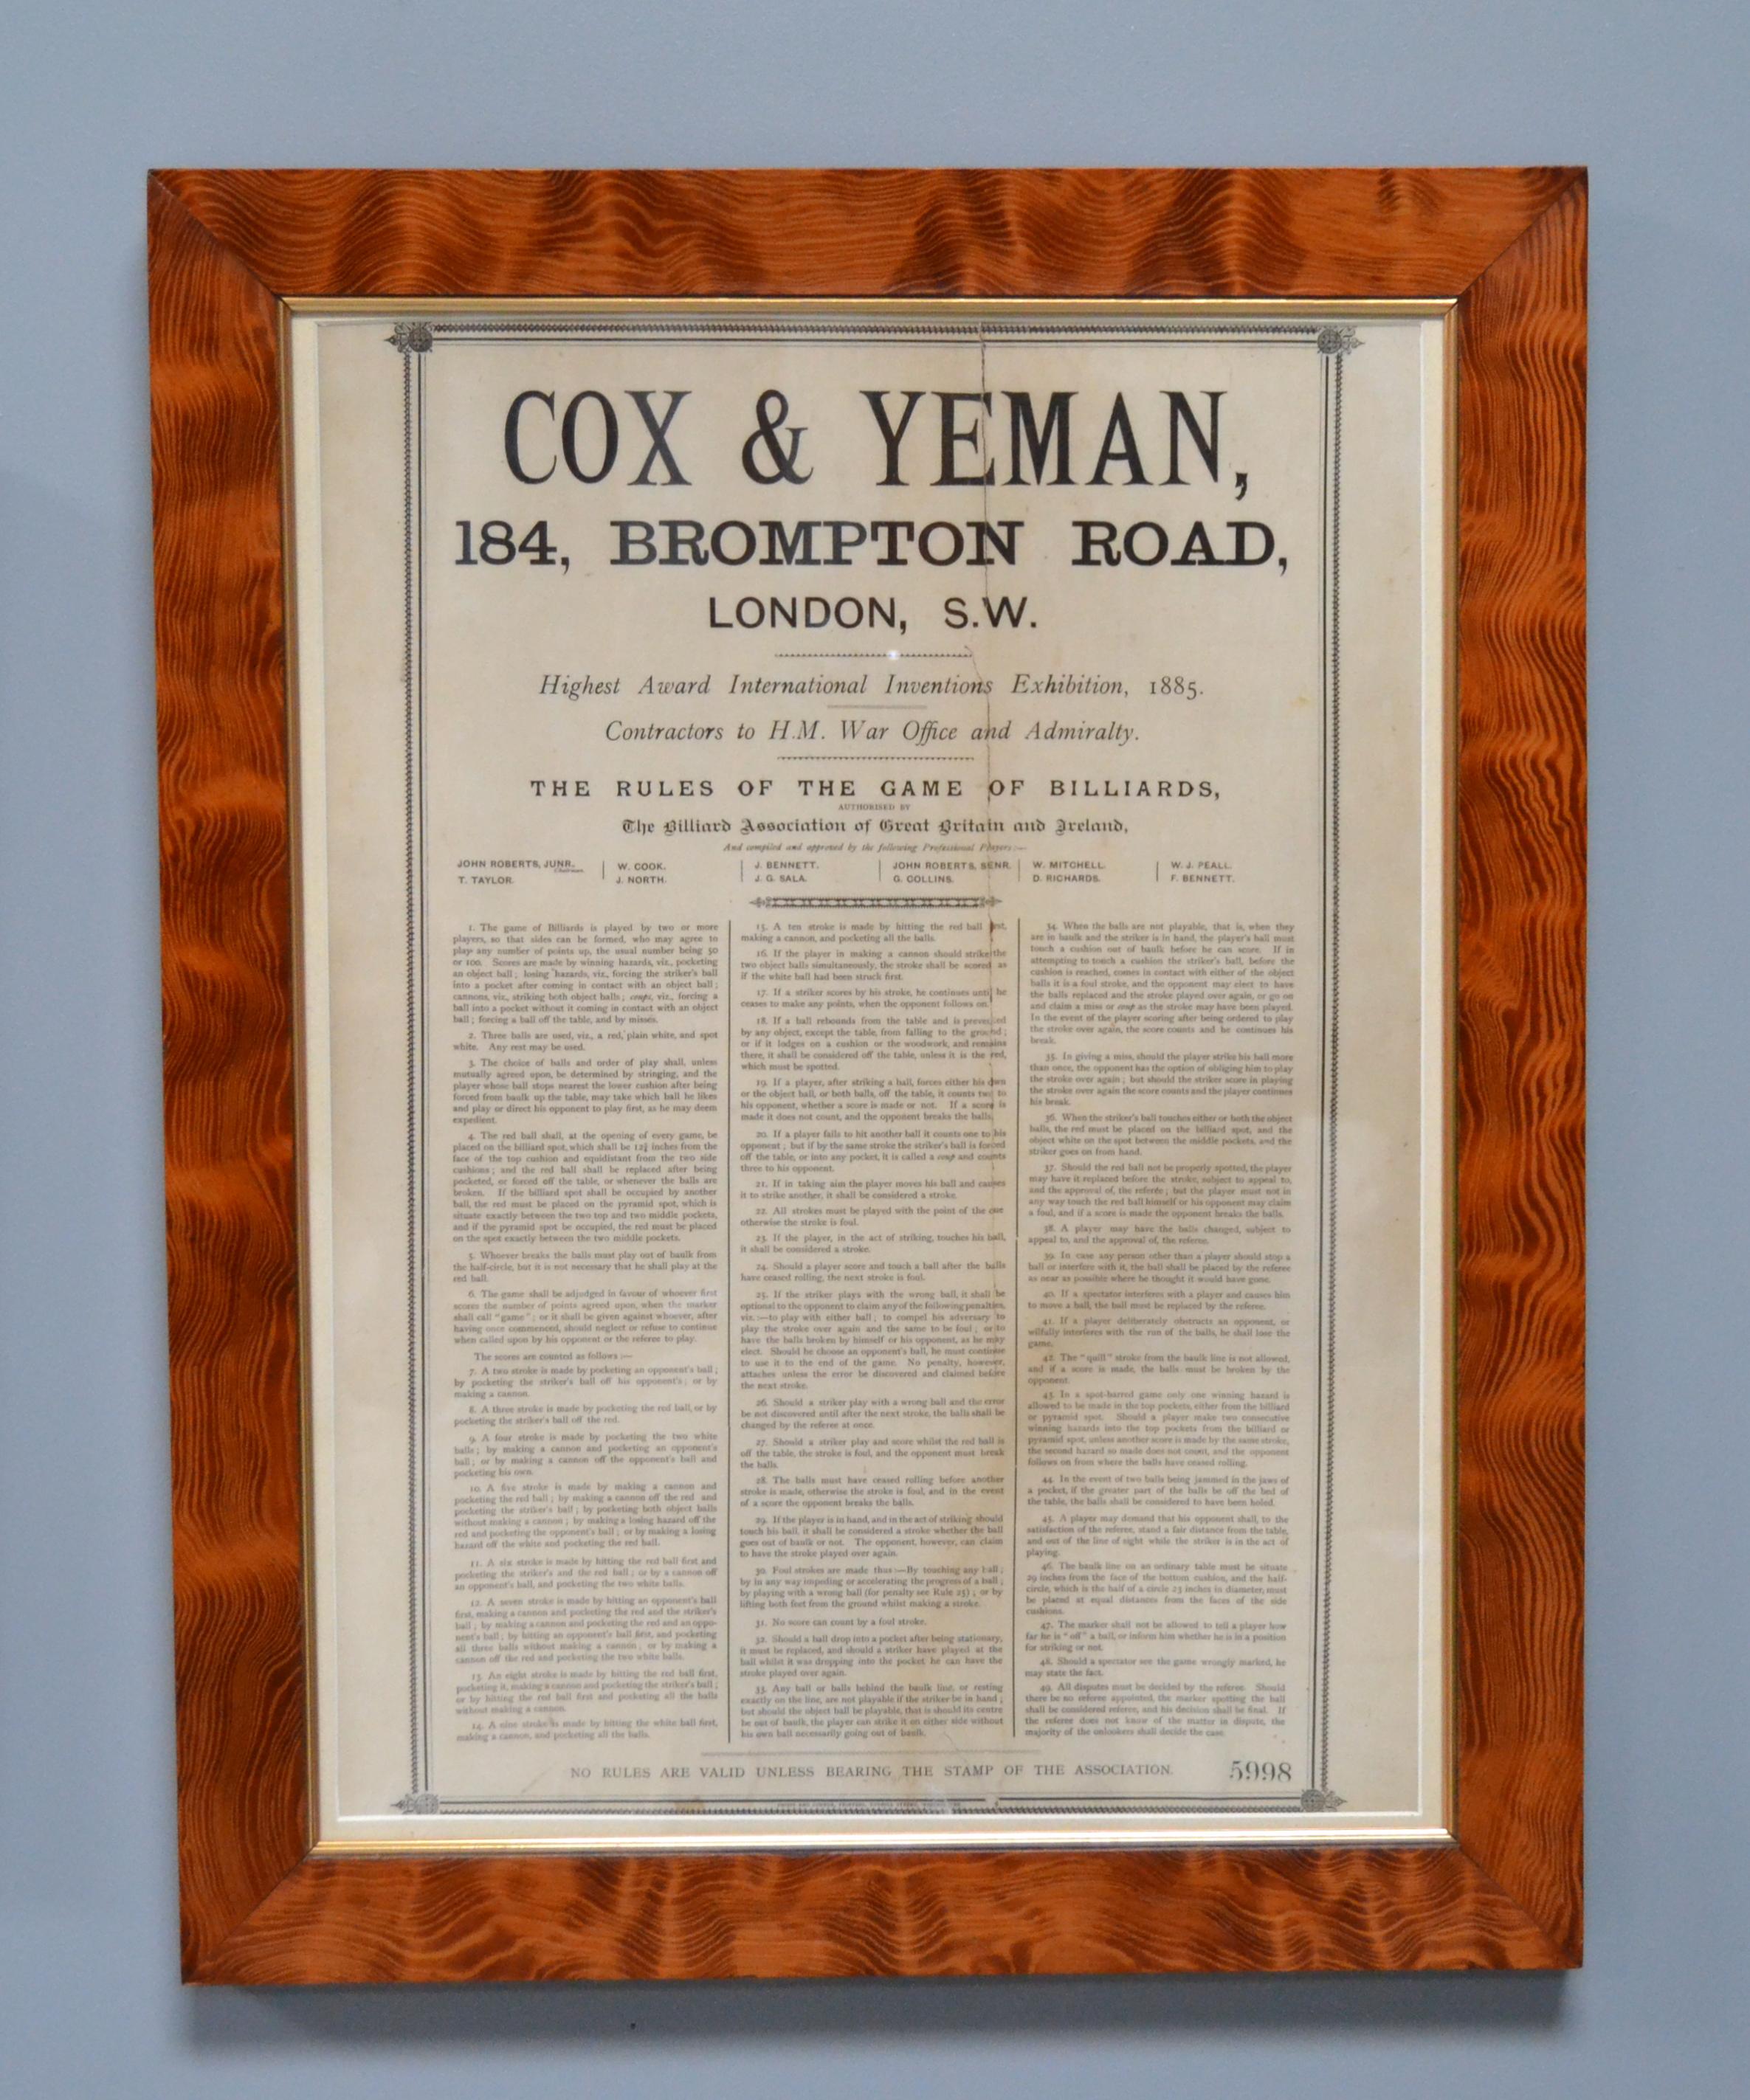 A beautiful set of Country House Billiard rules manufactured circa 1875 by Cox & Yeman of London, consisting of The Rules of Billiards, The Rules of Pyramid Pool and The Rules of Life Pool. 

There are some old tears and creases which is to be